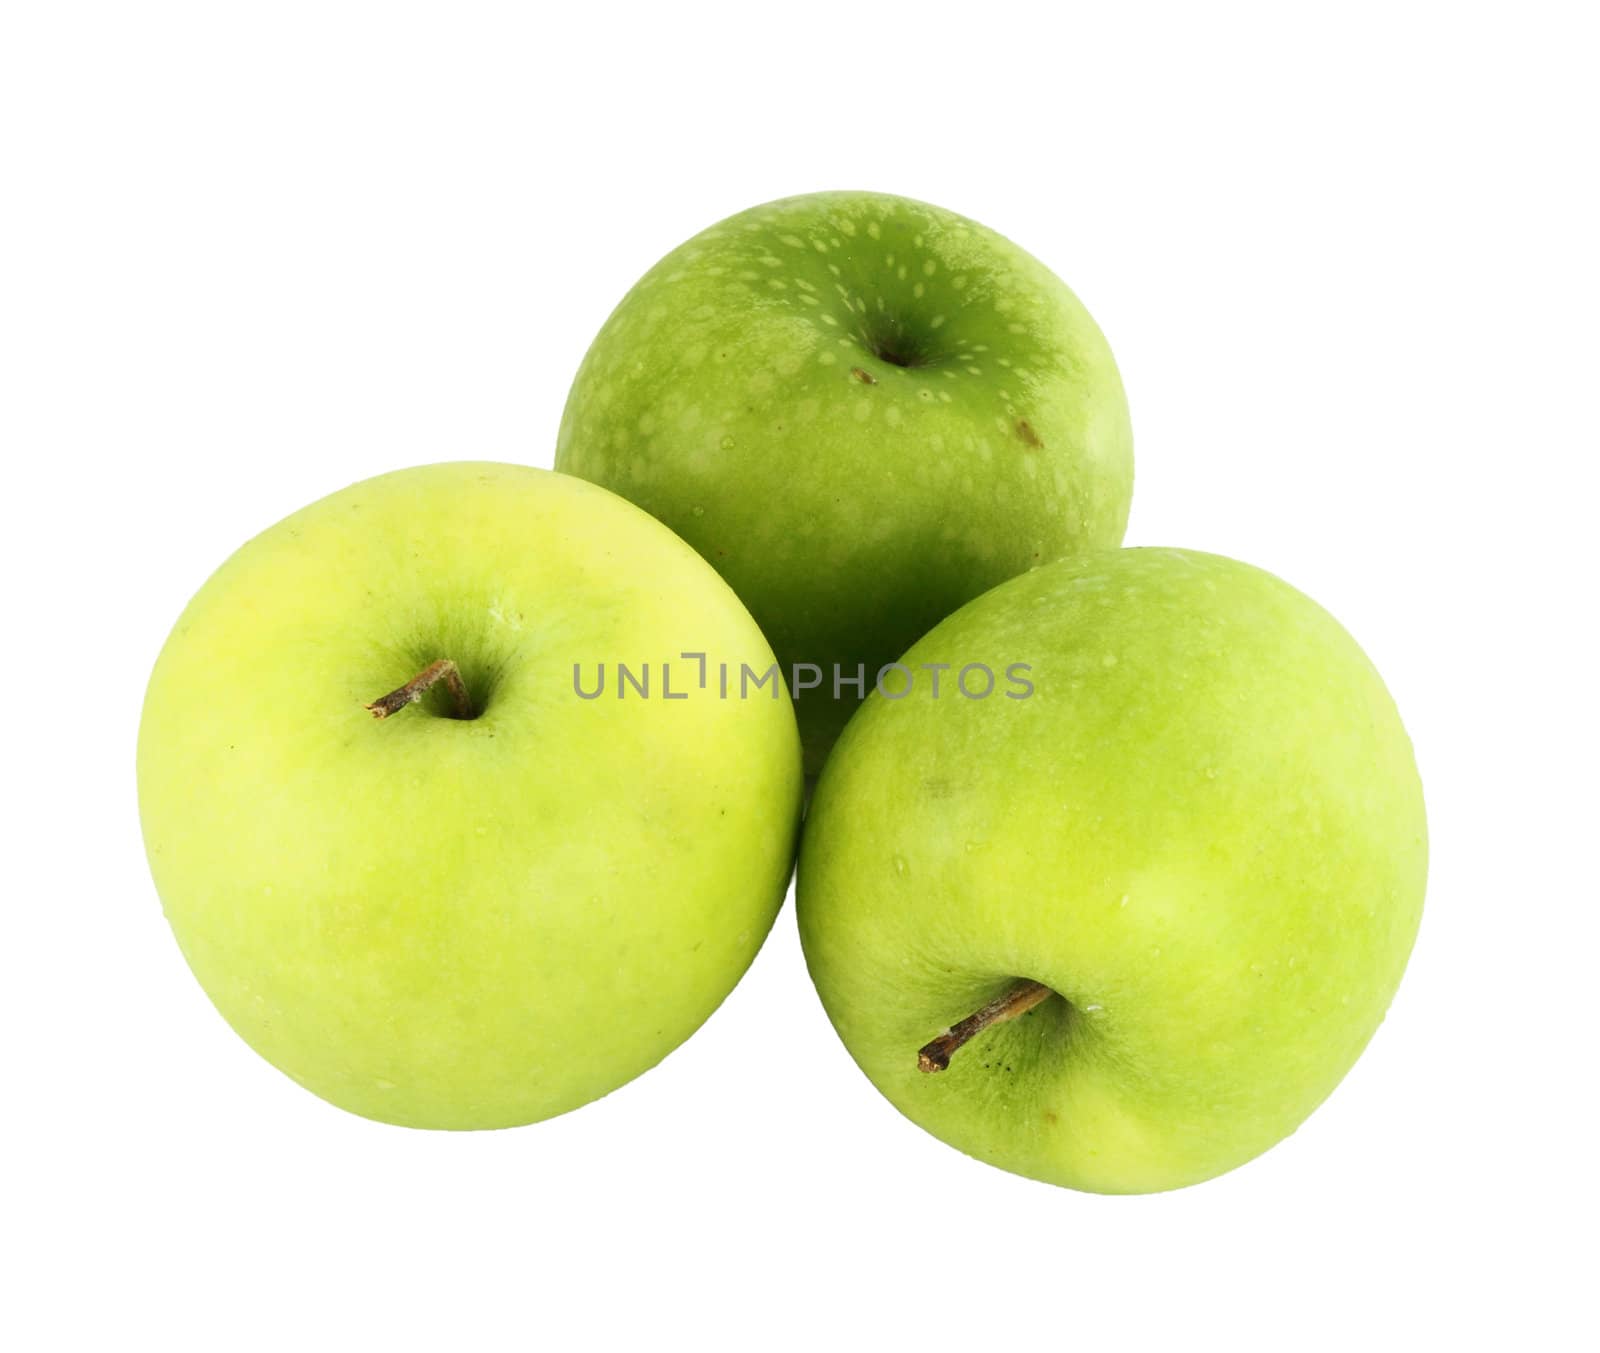 green apples isolated on white